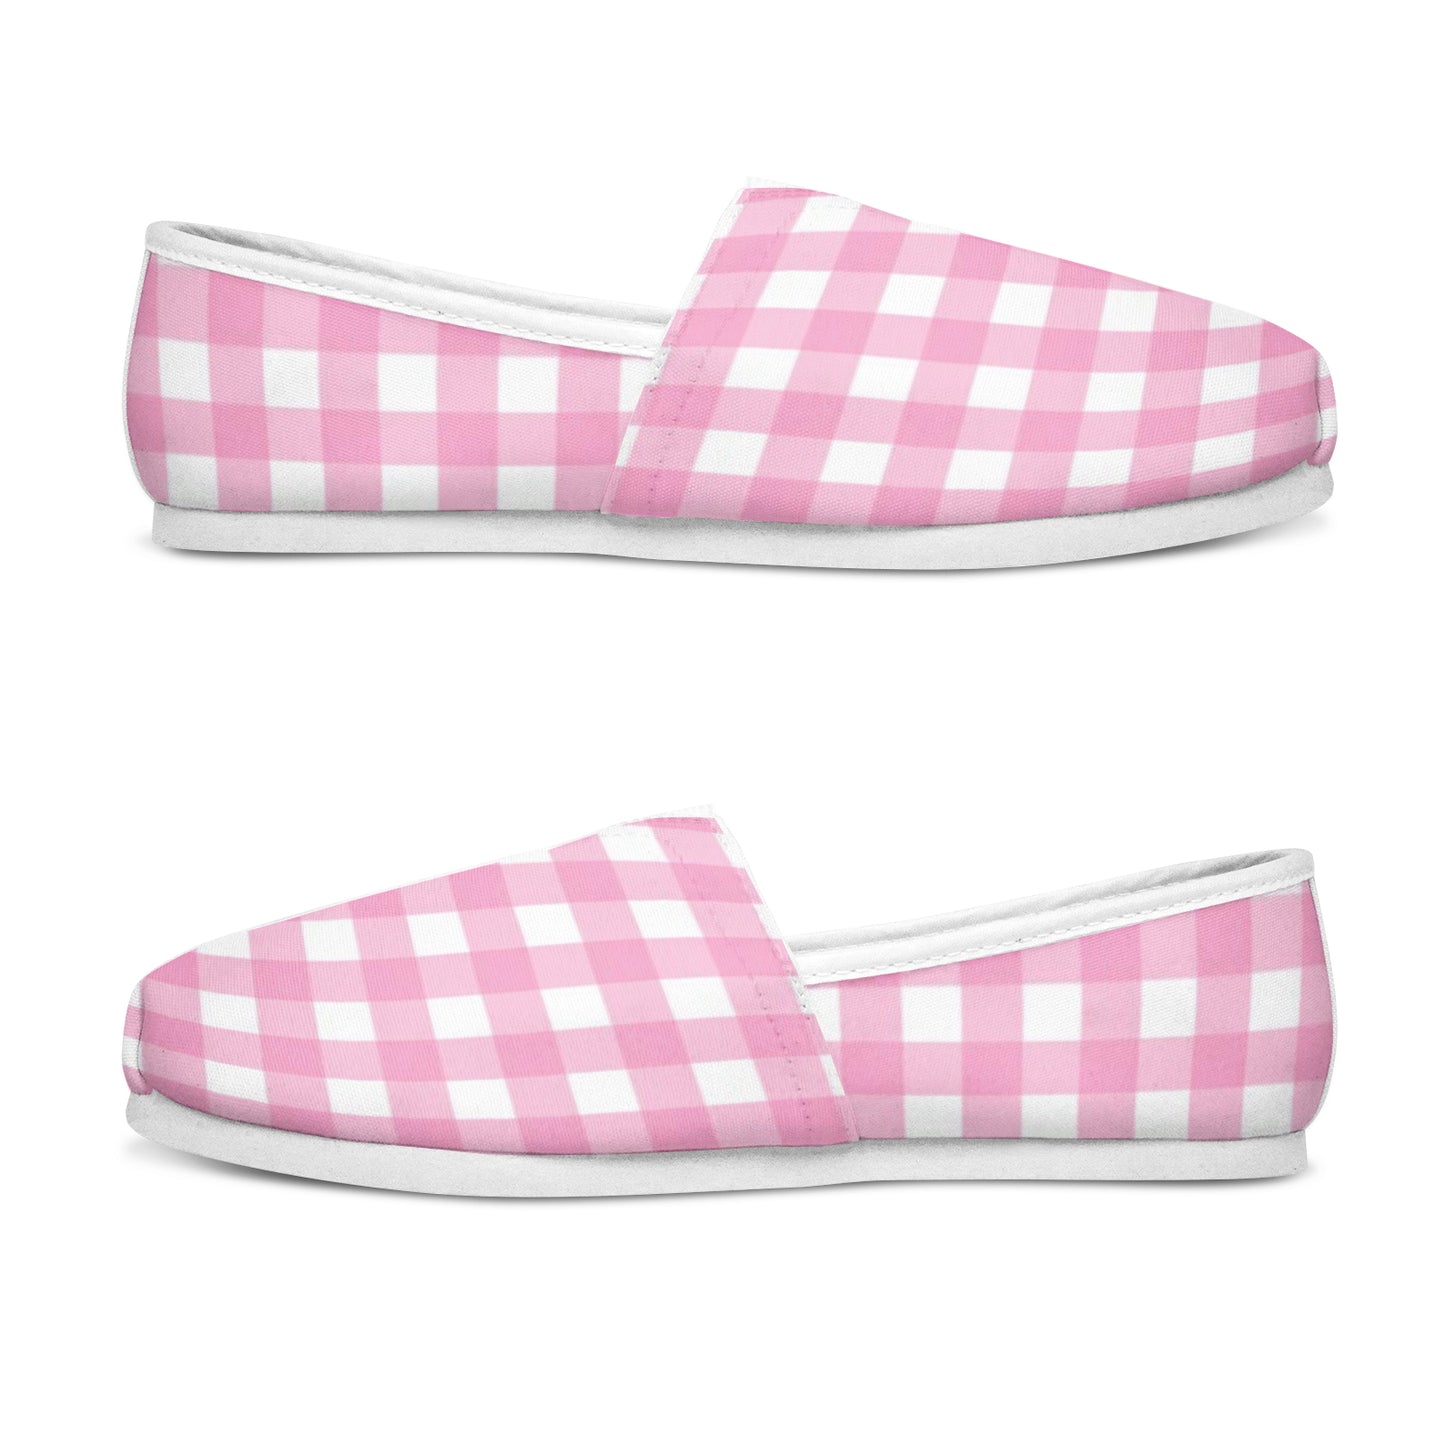 Casual Canvas Women's Shoes - Pink Checkered